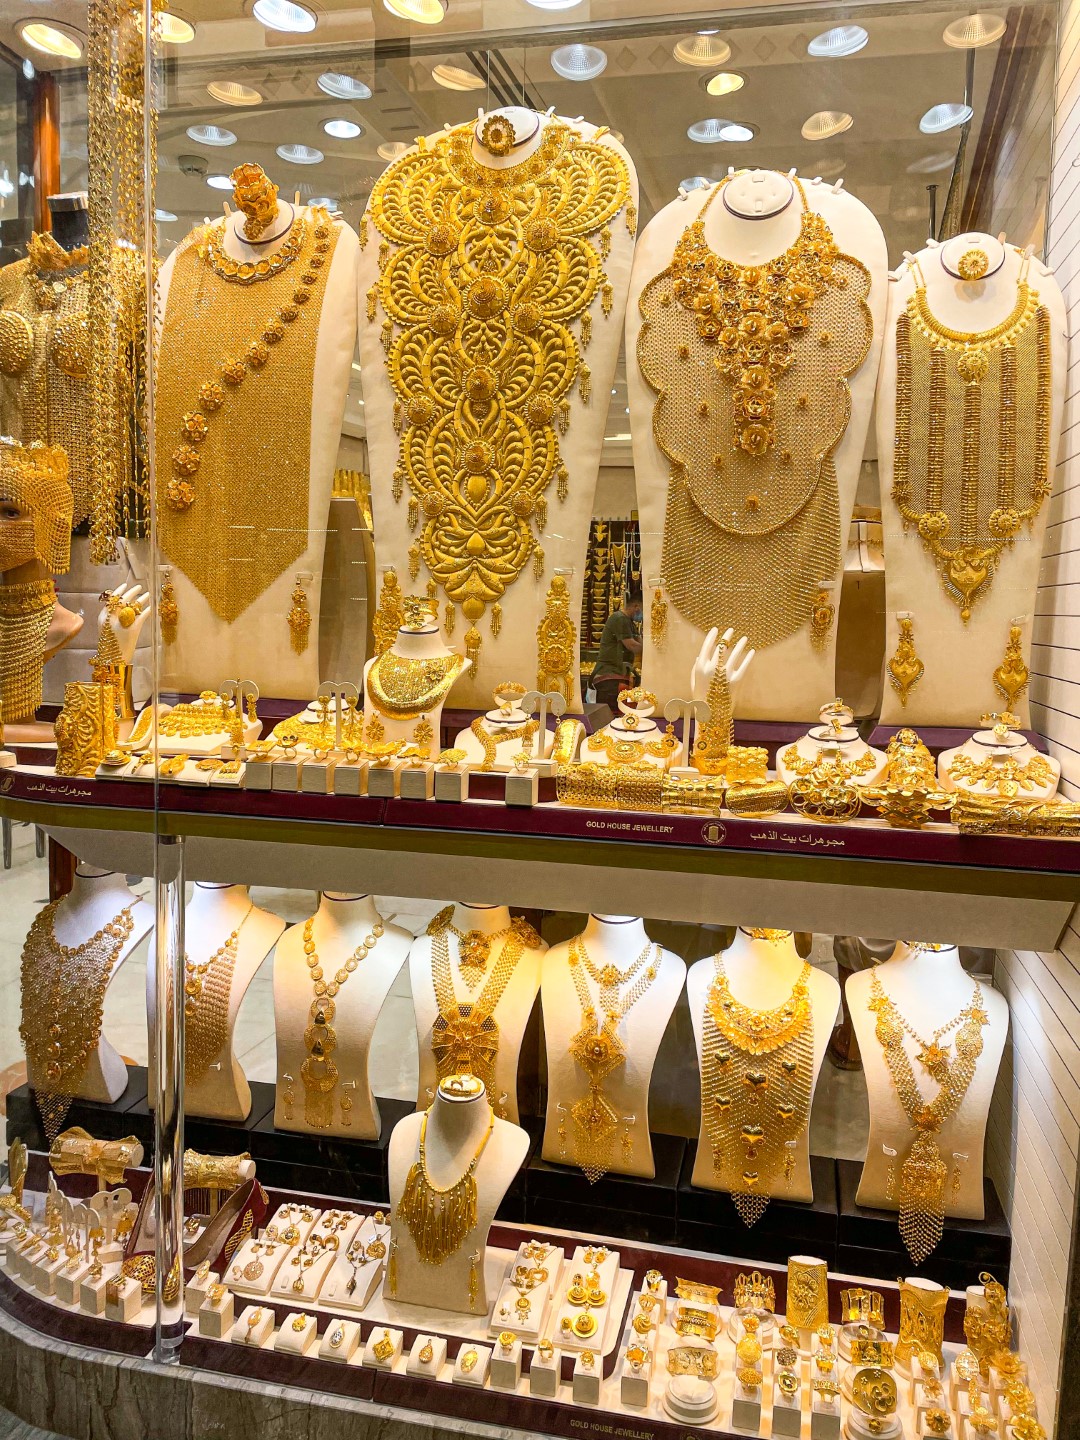 Gold jewelry in display at the Gold Souk Dubai.